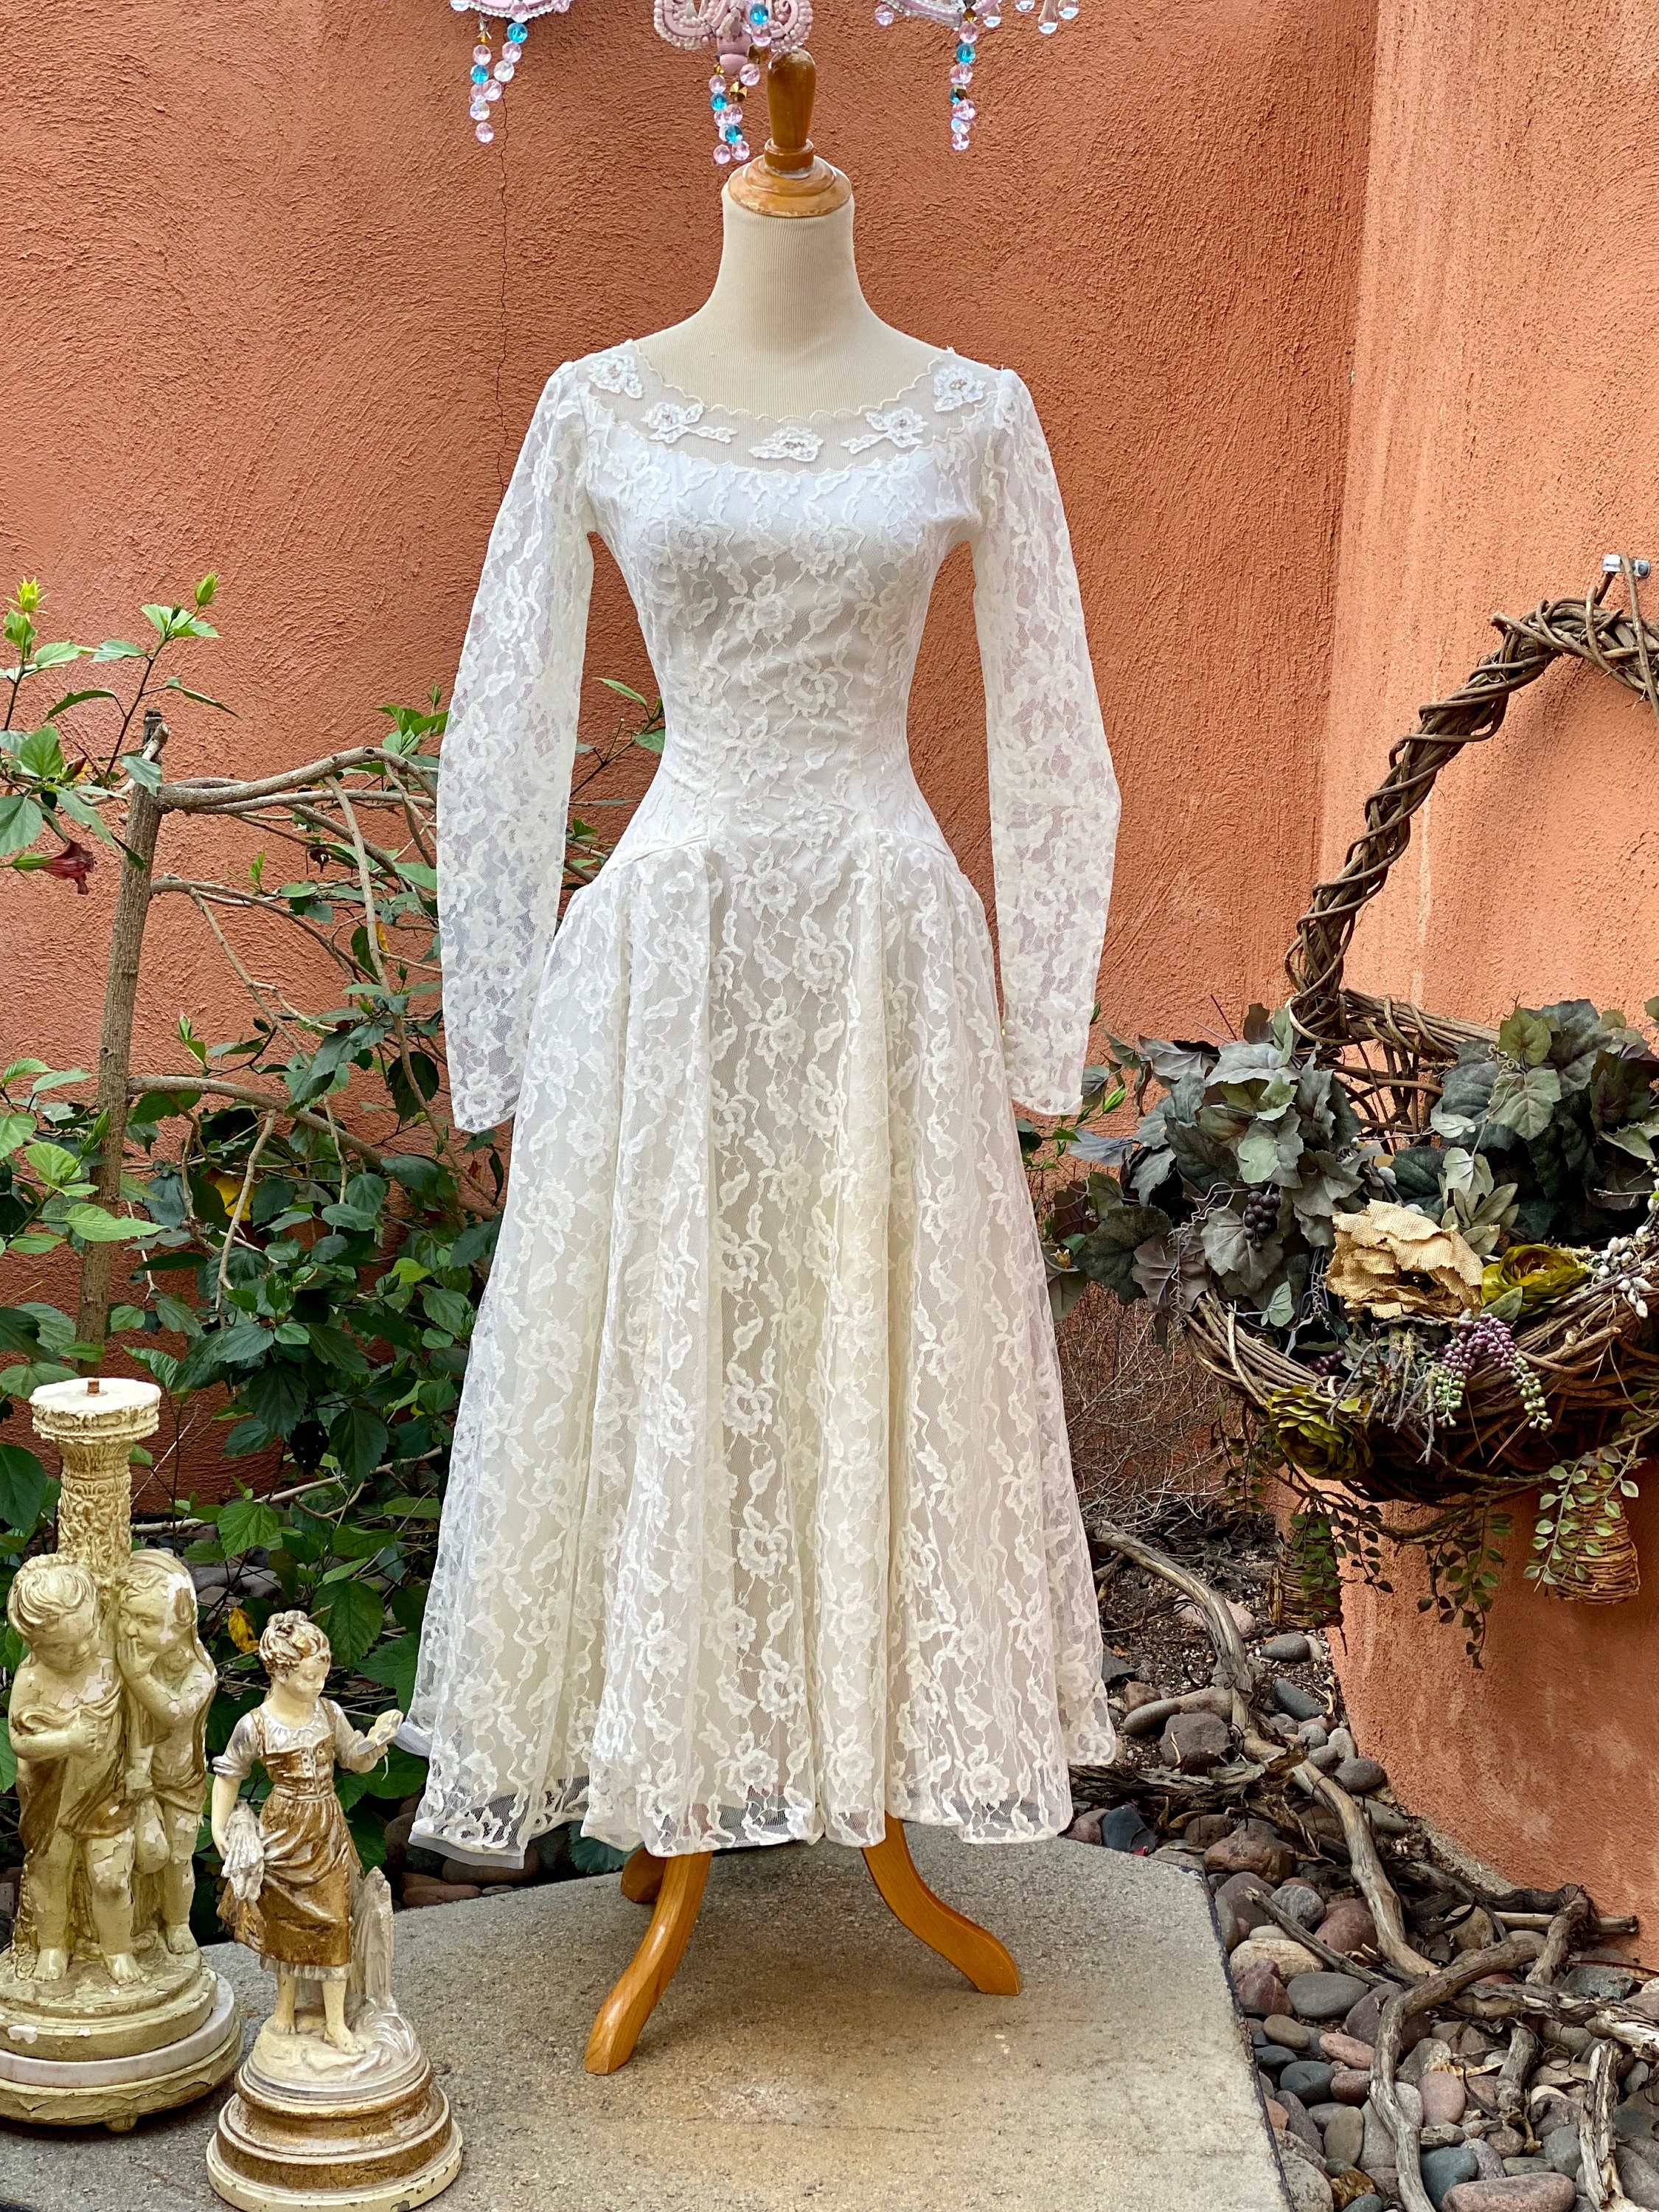 1950s White Lace Tea Length Wedding Dress Long Sleeves Sewn in Dress Weights  for Fabulous Fit Size S 